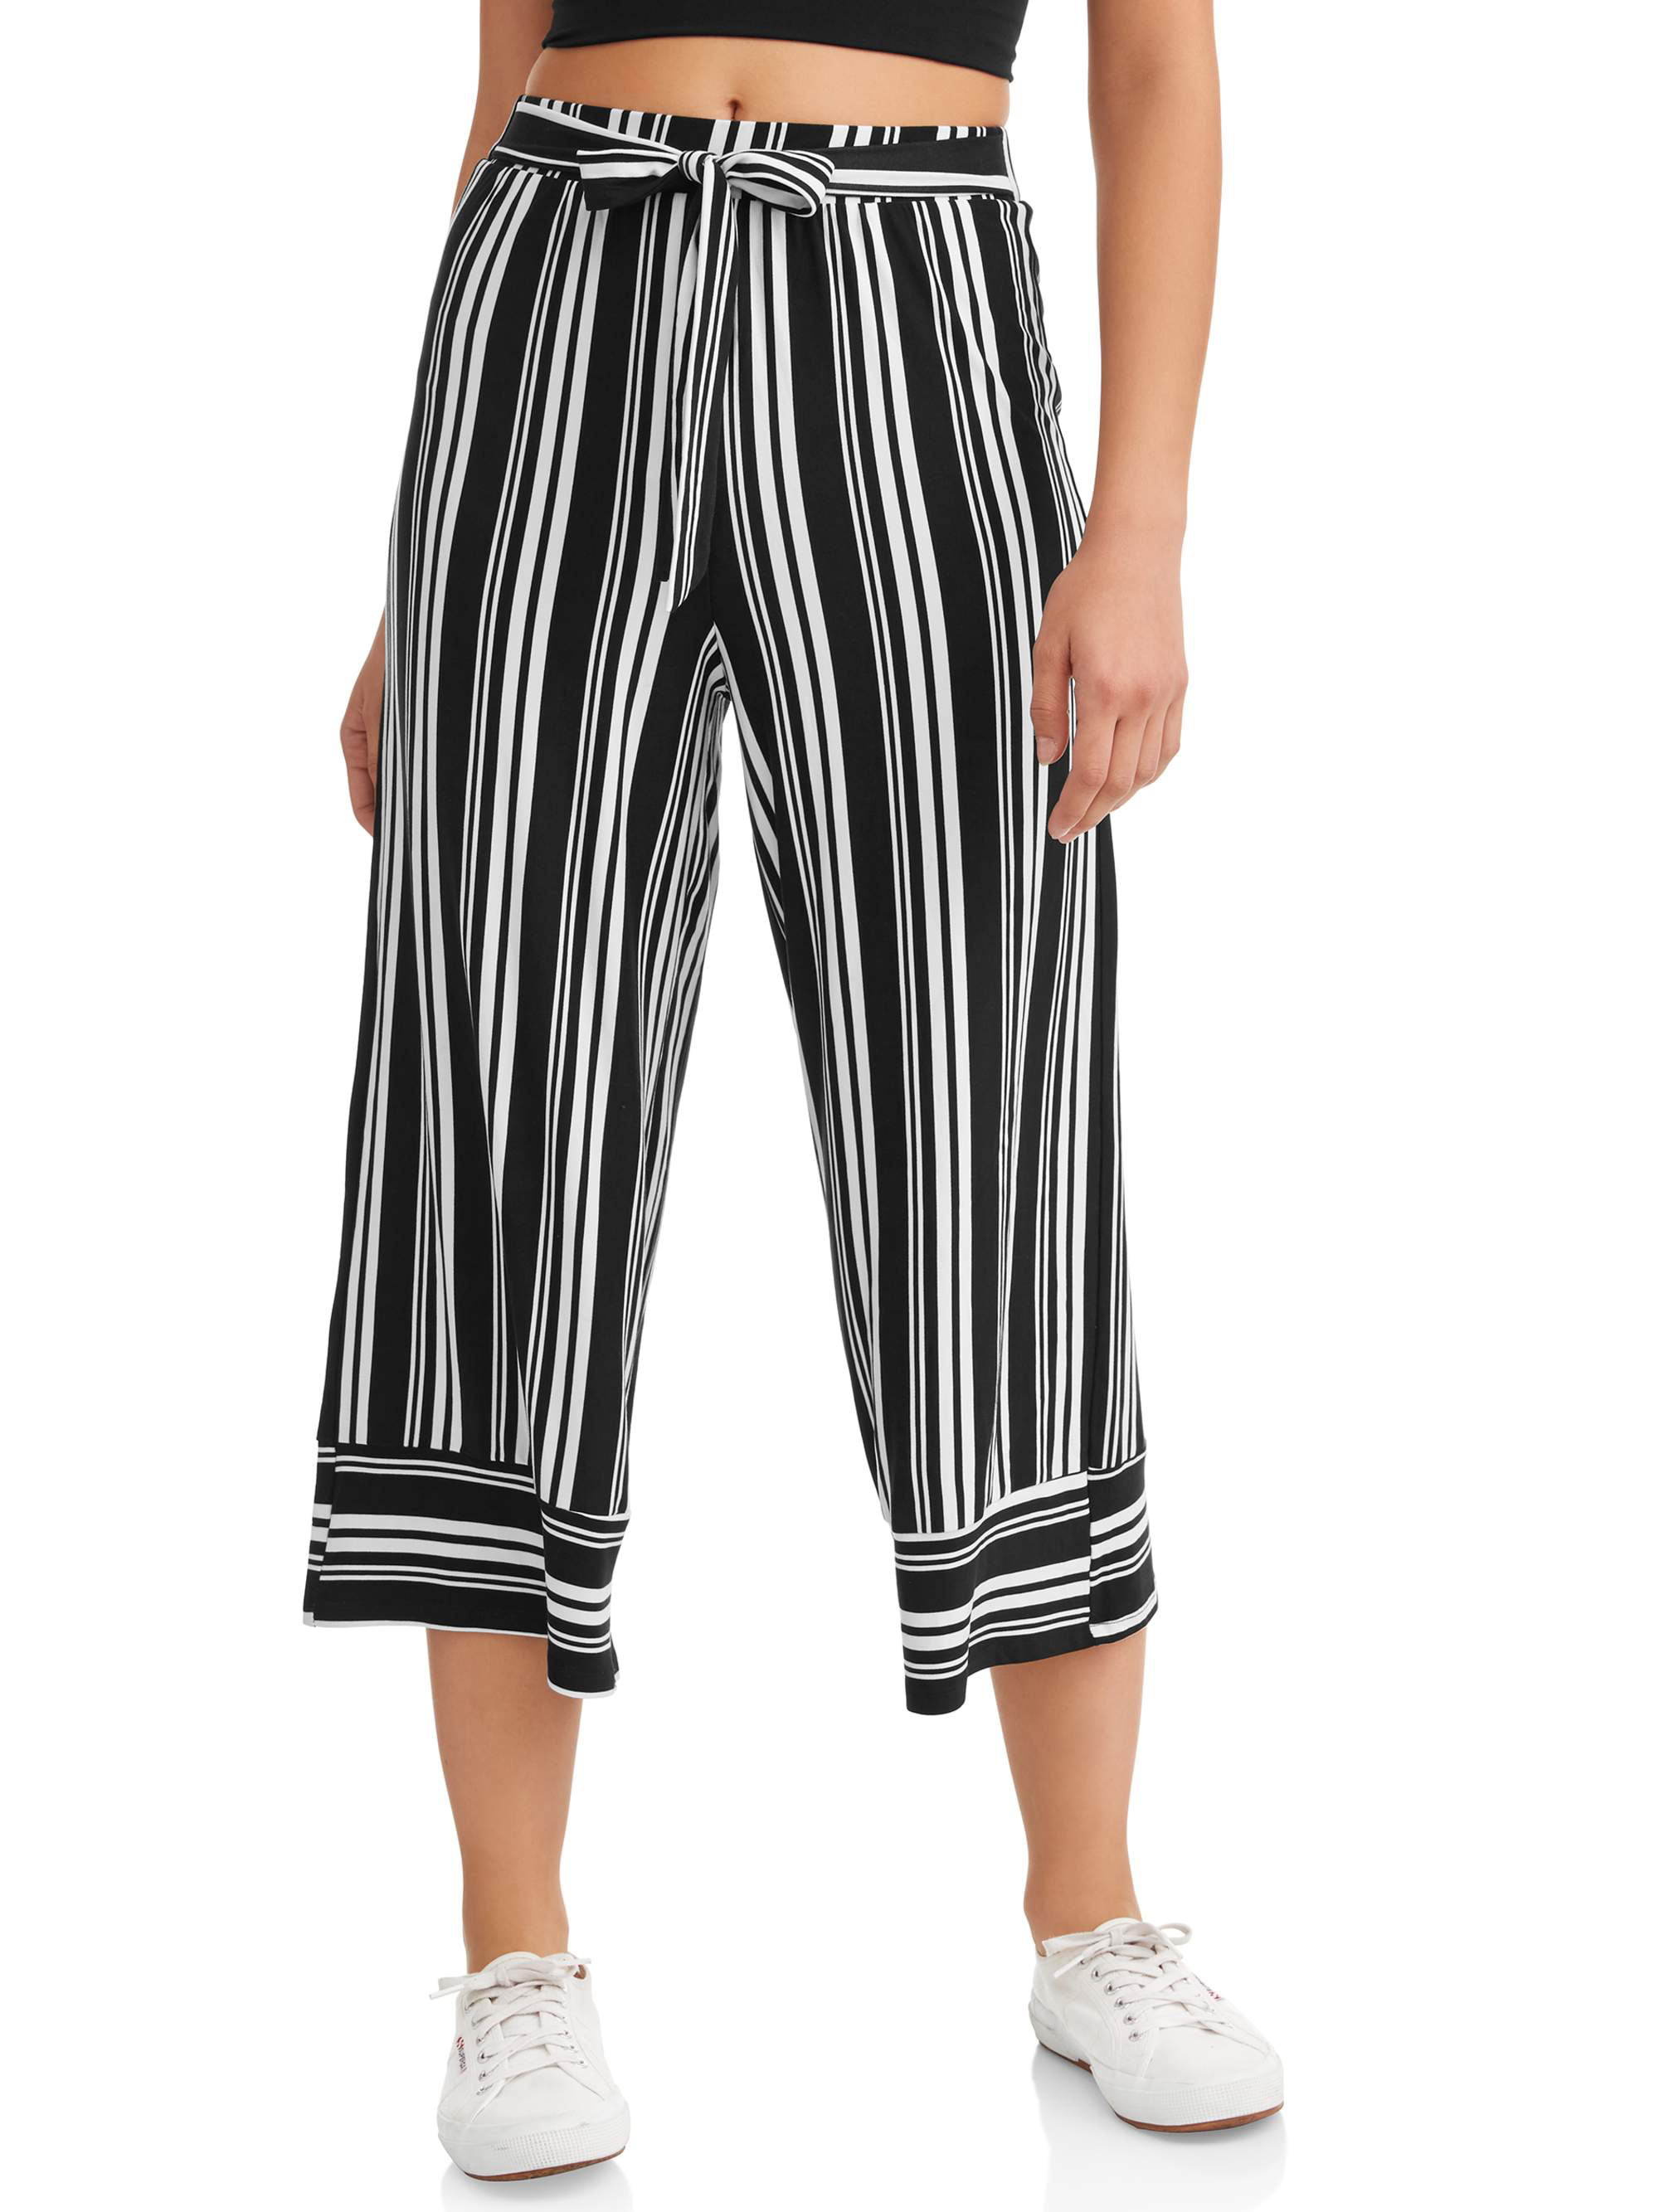 No Comment - Juniors' Yummy Wide Leg Crop Pants with Tie Waist ...